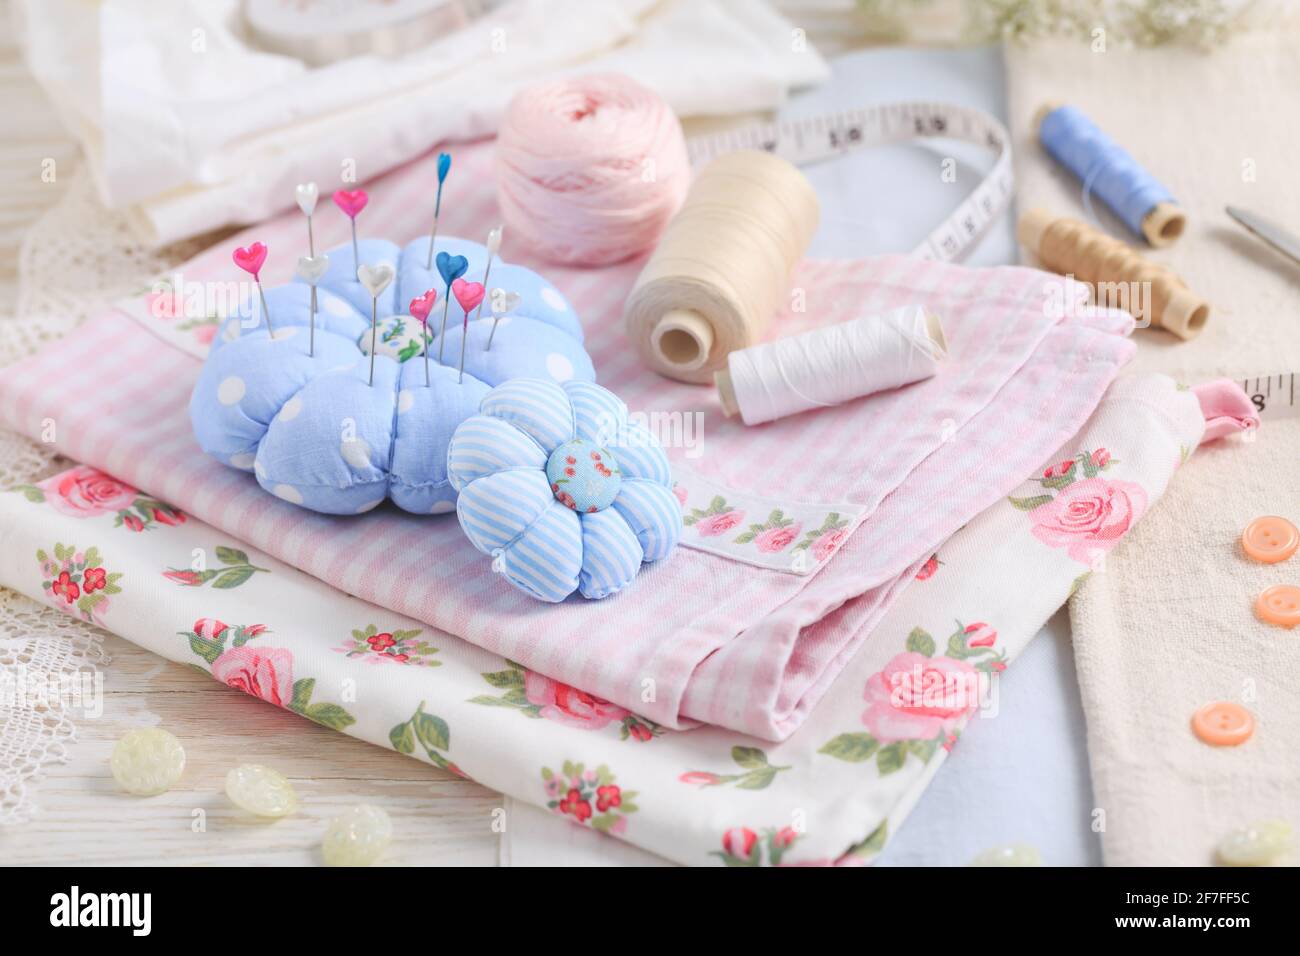 Sewing tools and supplies  - handmade pincushion, scissors, bobbins with thread, needles and fabric. Hobby, crafting, creativity, free time at home co Stock Photo